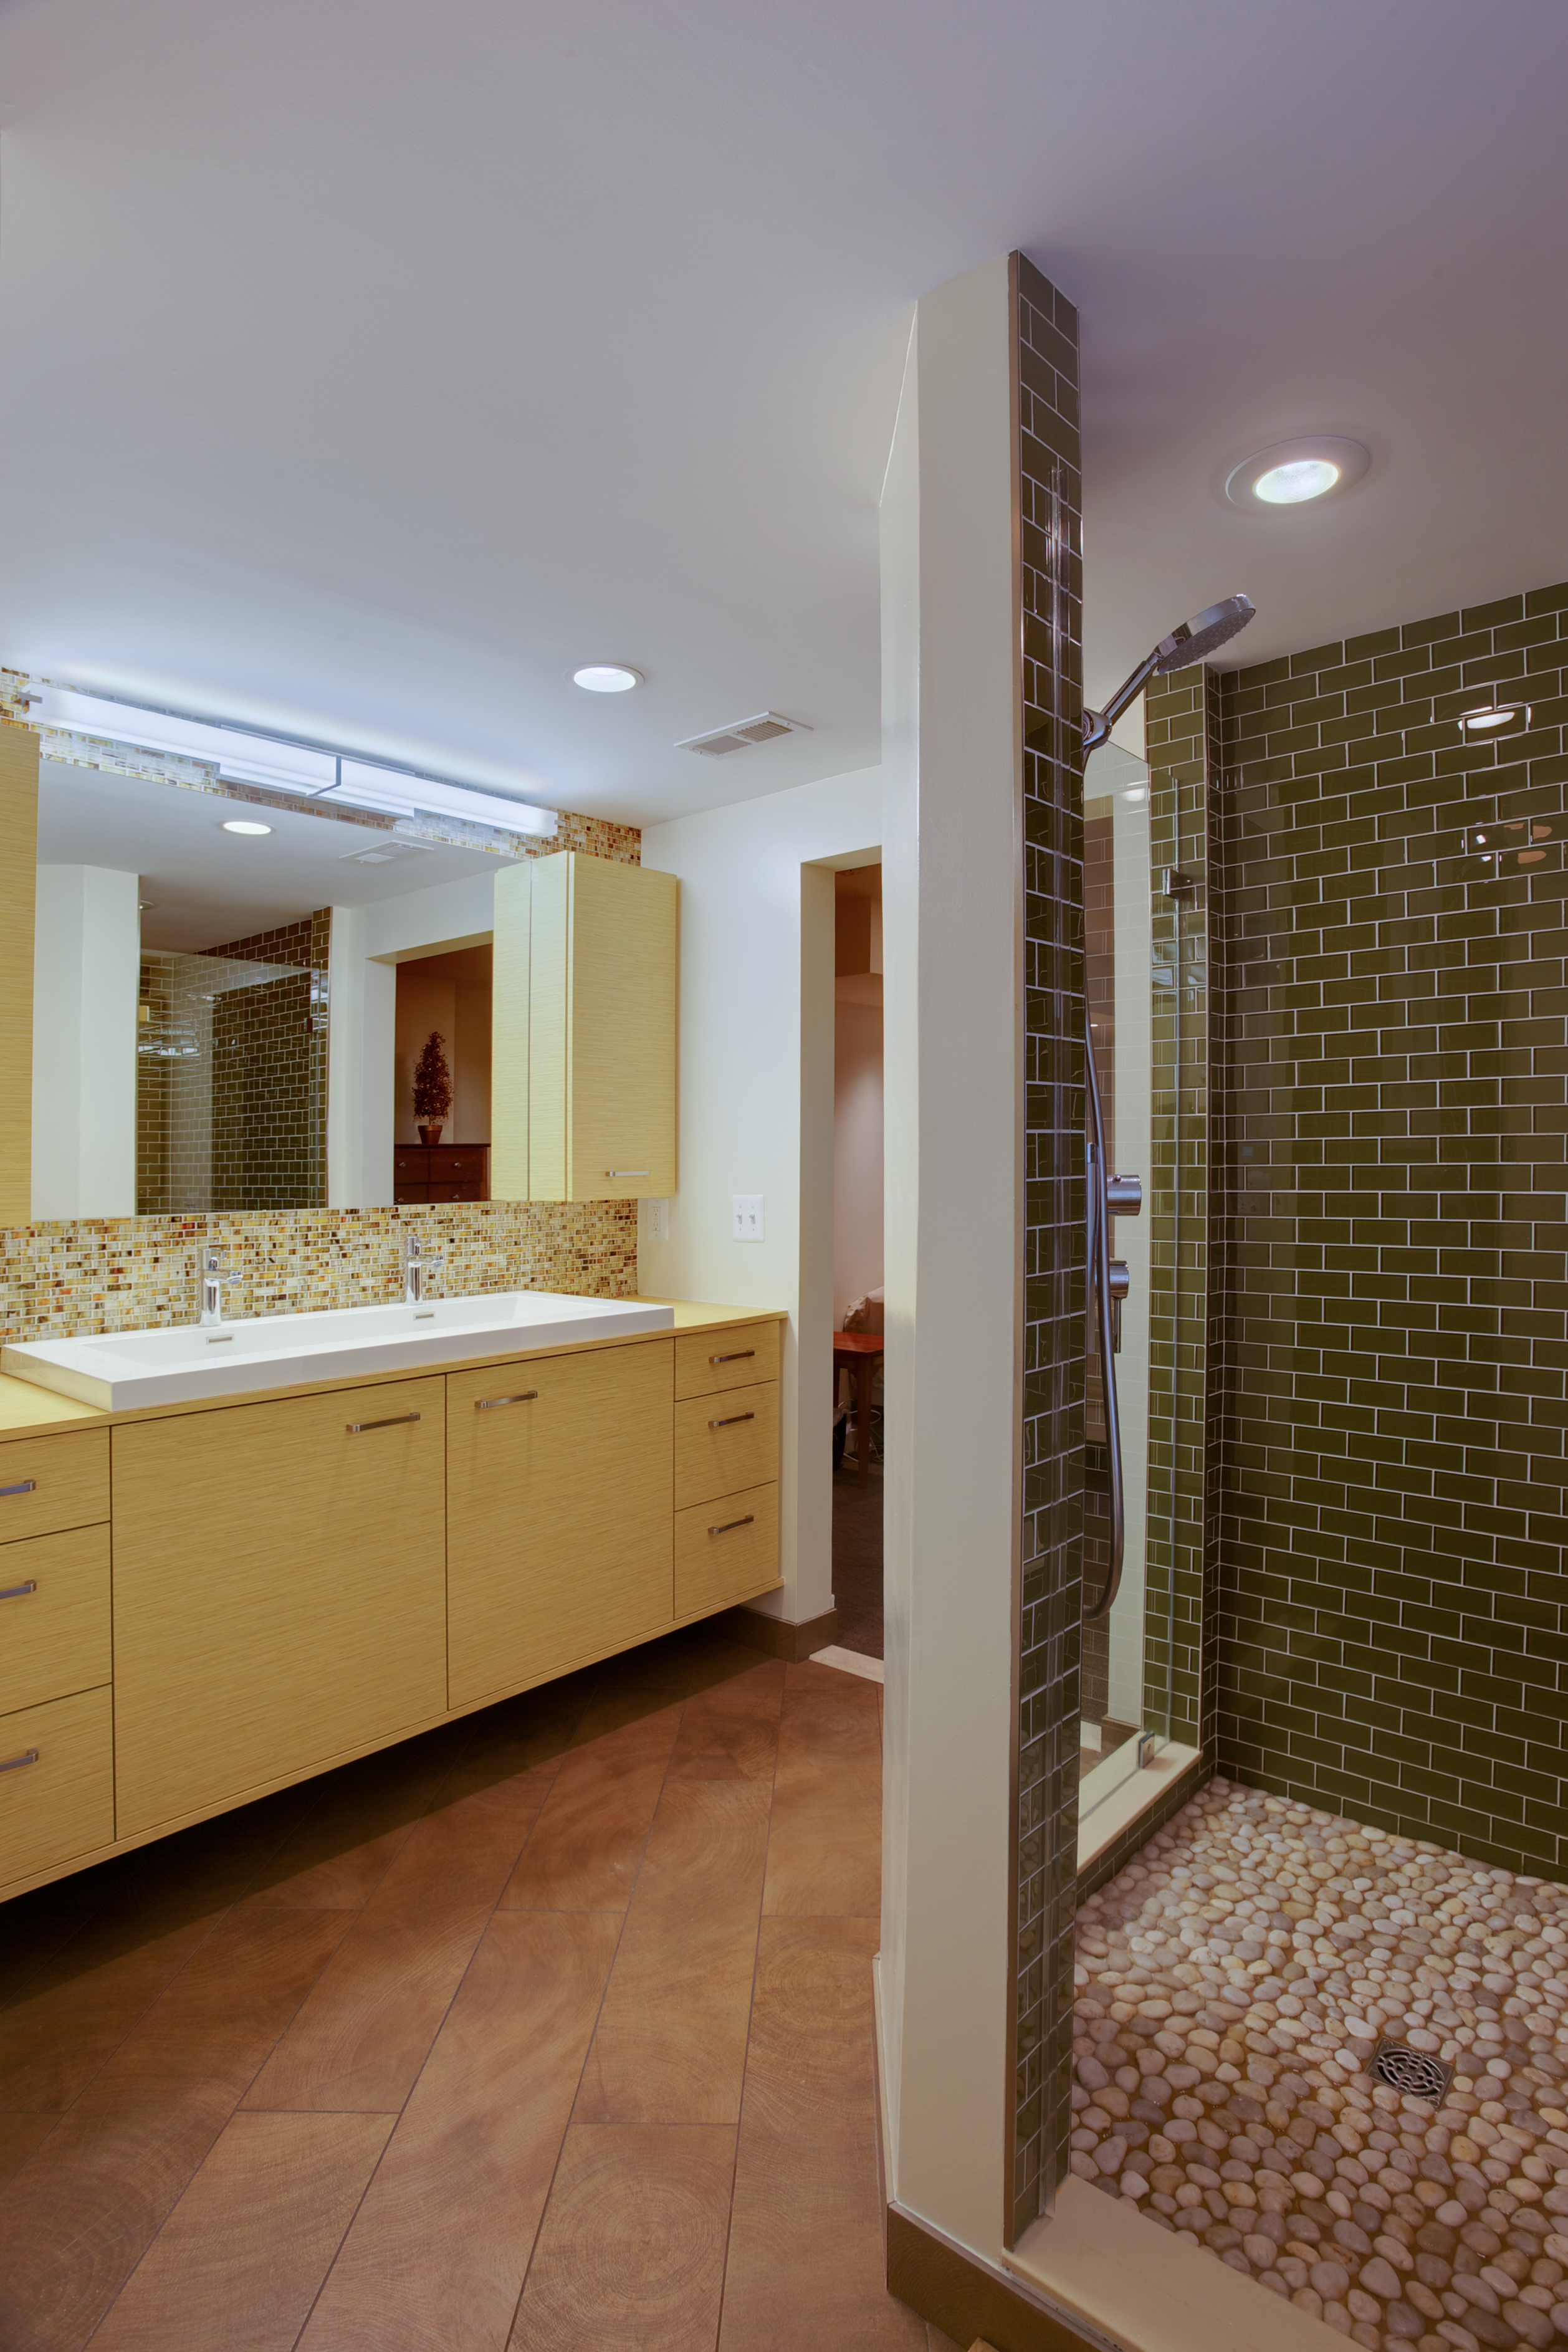 Bathroom with double vanity and yellow, wood cabinetry - view 7